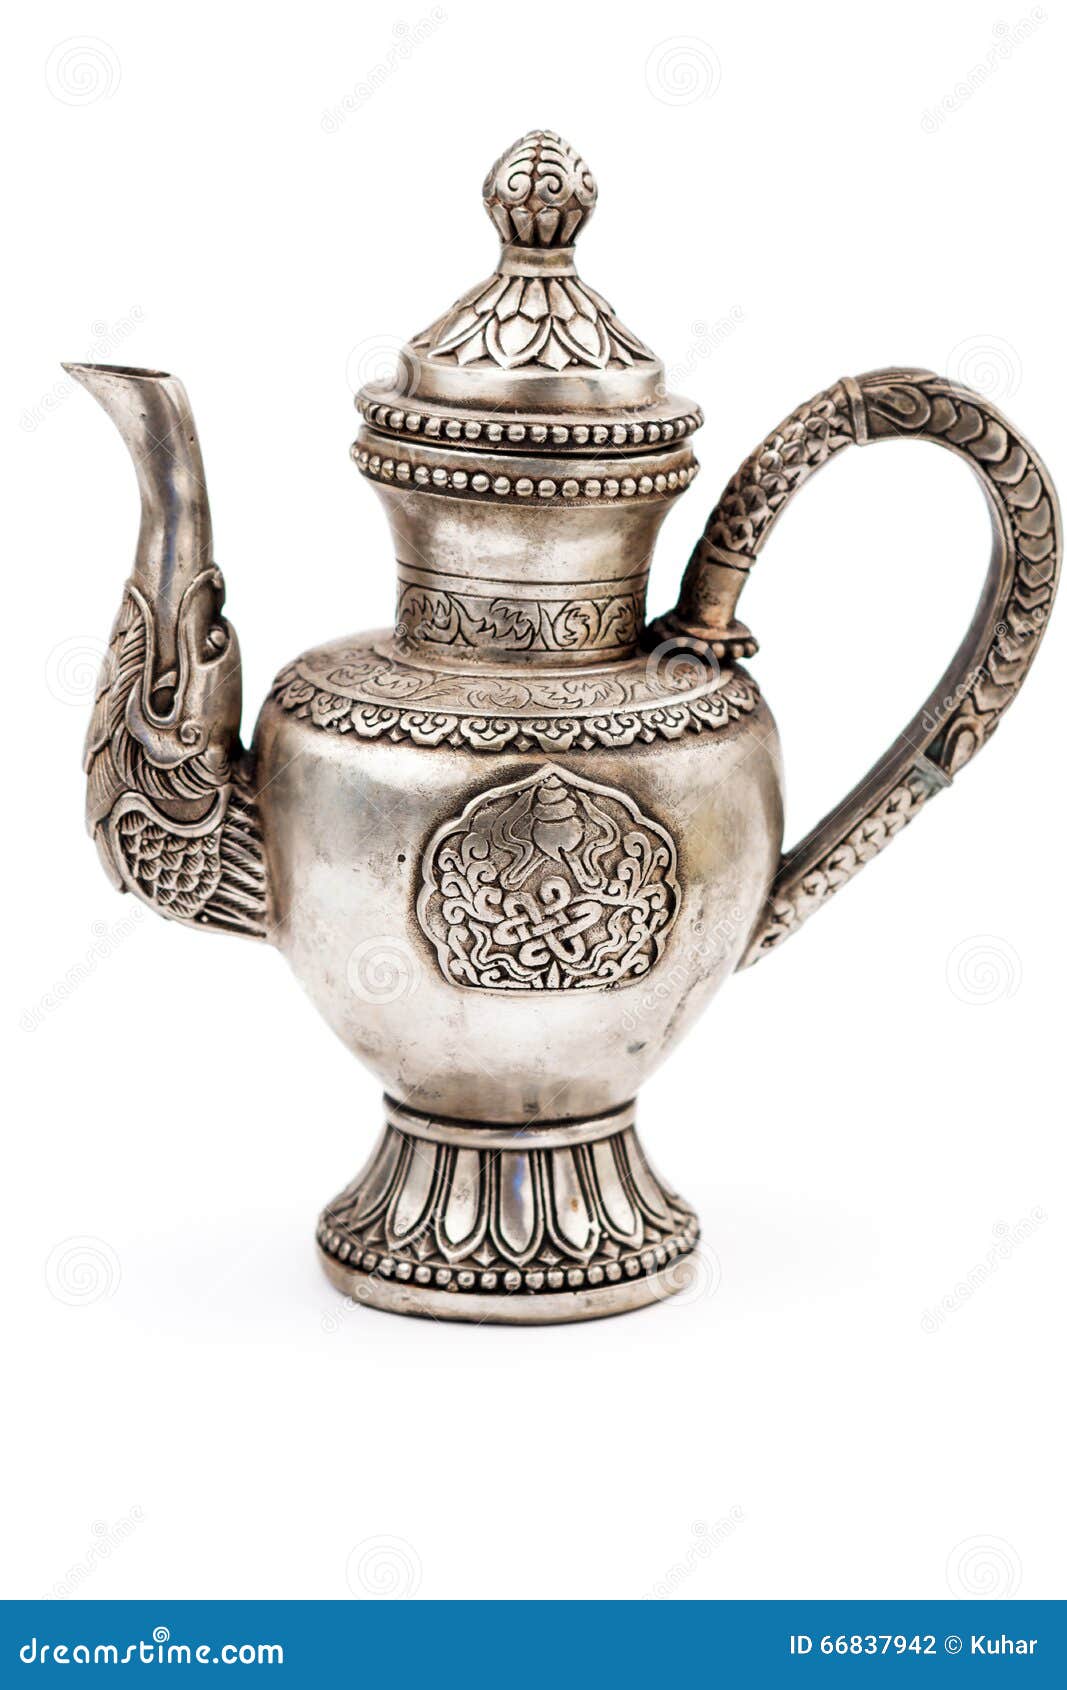 https://thumbs.dreamstime.com/z/antique-silver-teapot-isolated-white-66837942.jpg